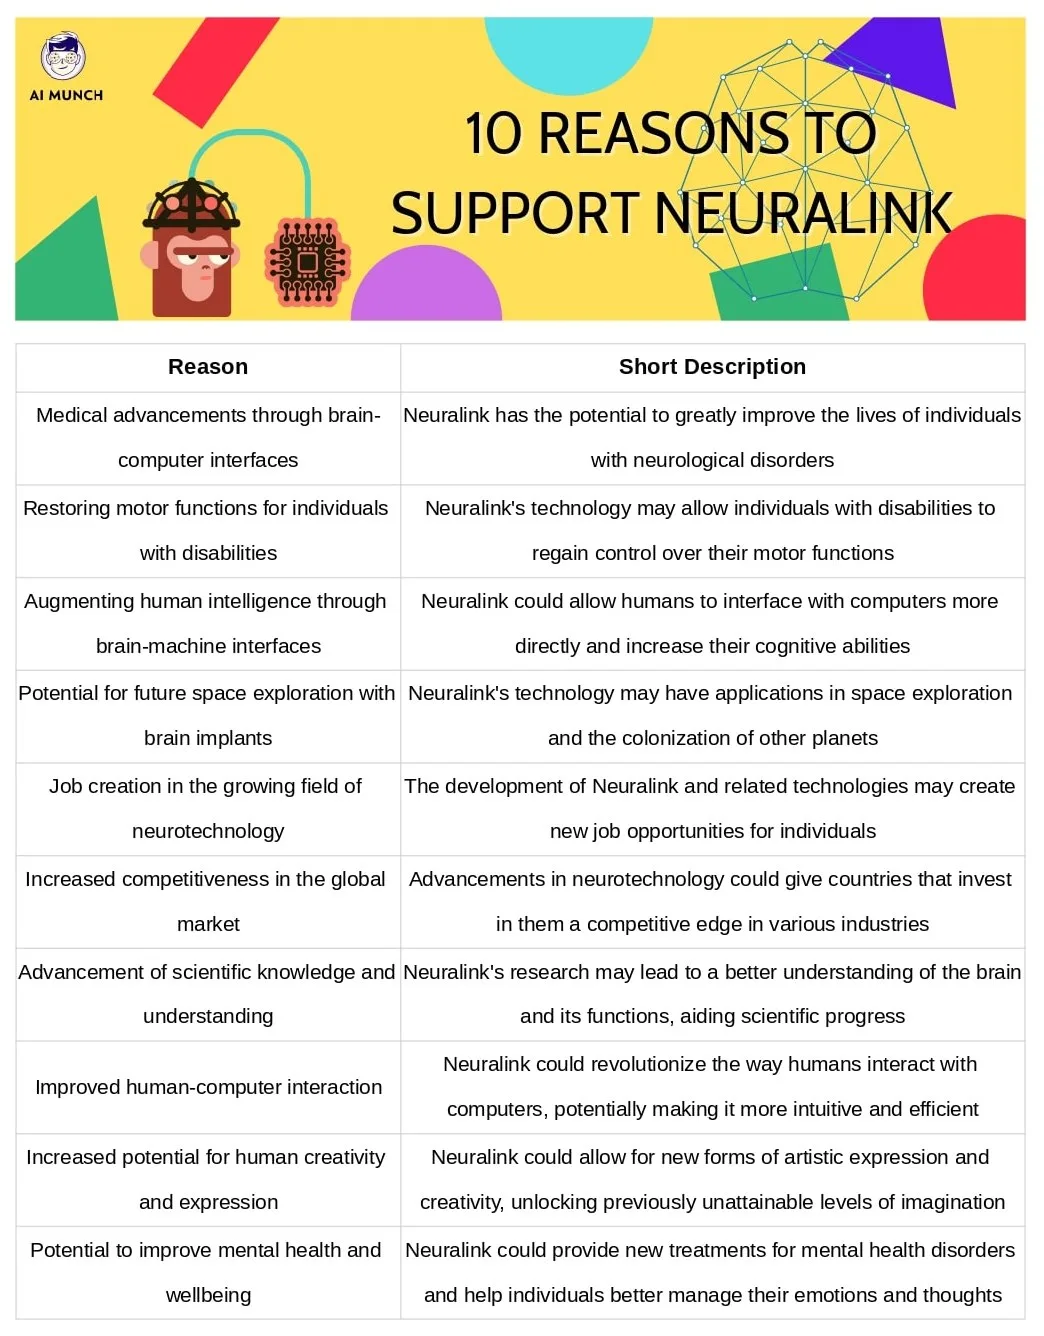 what is a neuralink AND reasons TO SUPPORT NEURALINK